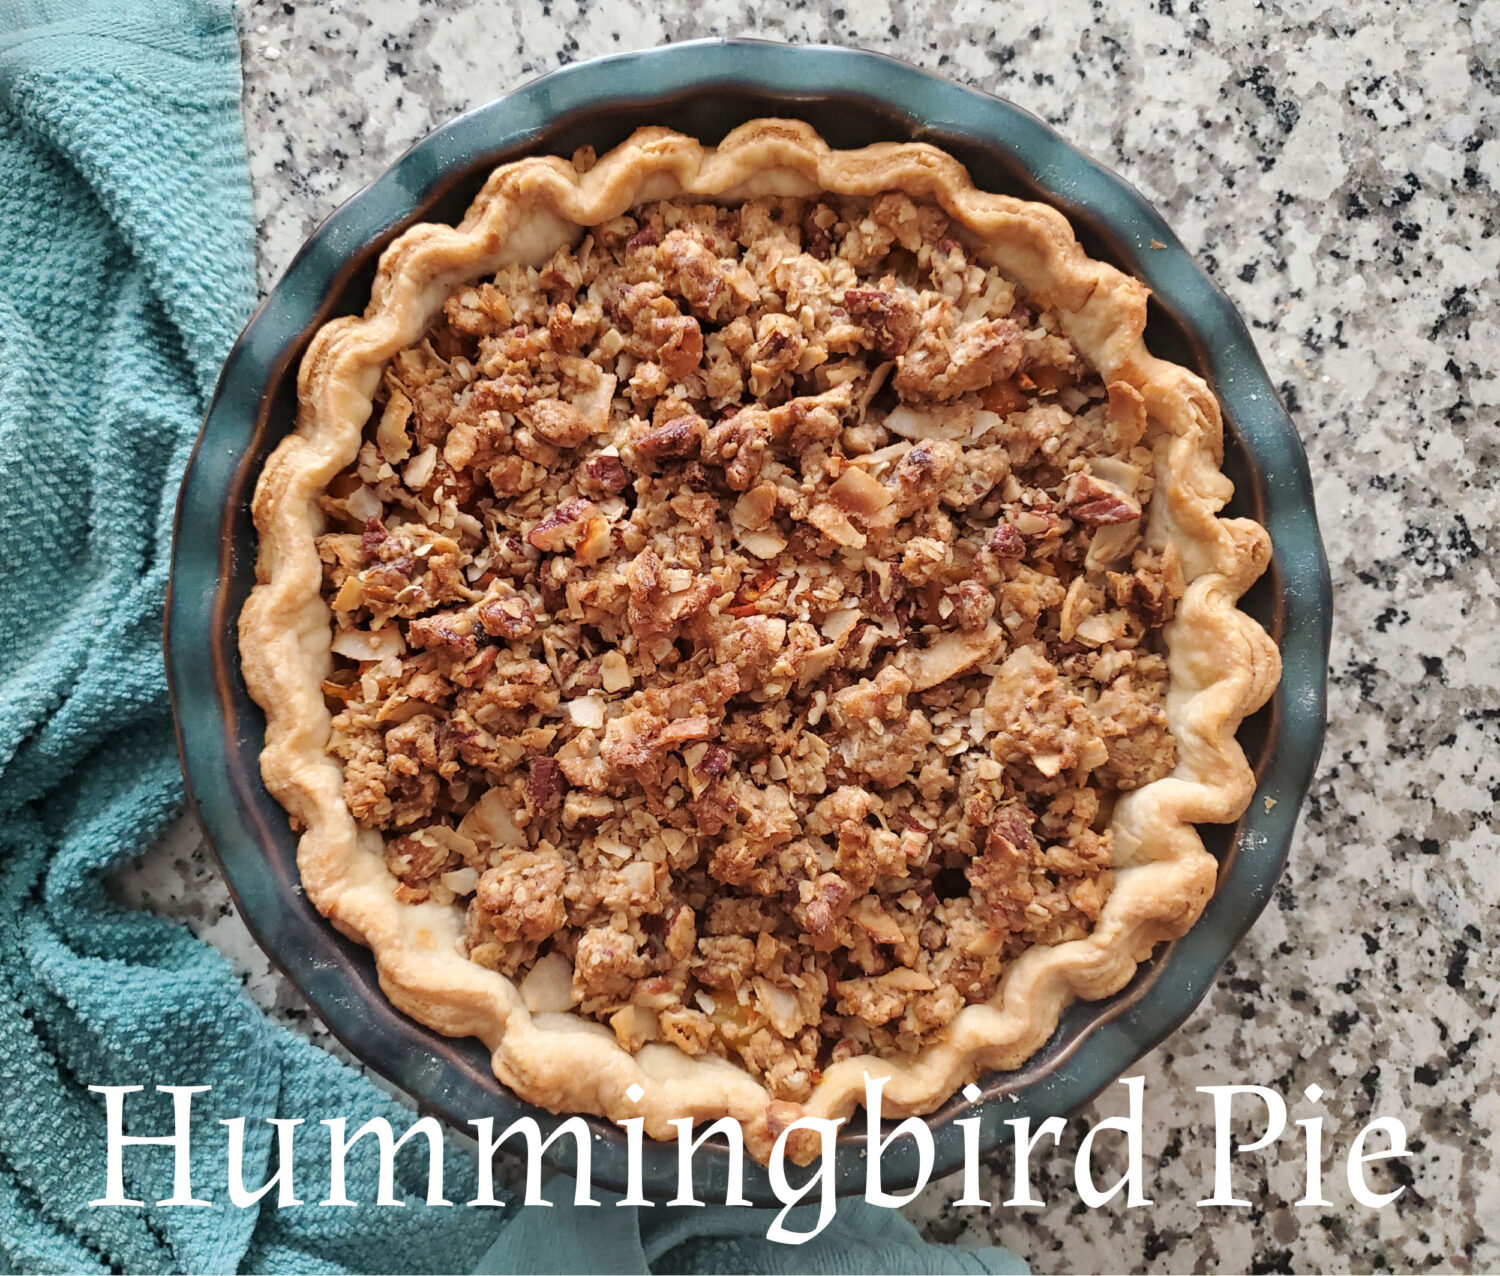 Hummingbird Pie: Tropical fruit, spices, pecans, lightly sweetened with a brown sugar, coconut-pecan crumble, and cream cheese whipped cream.